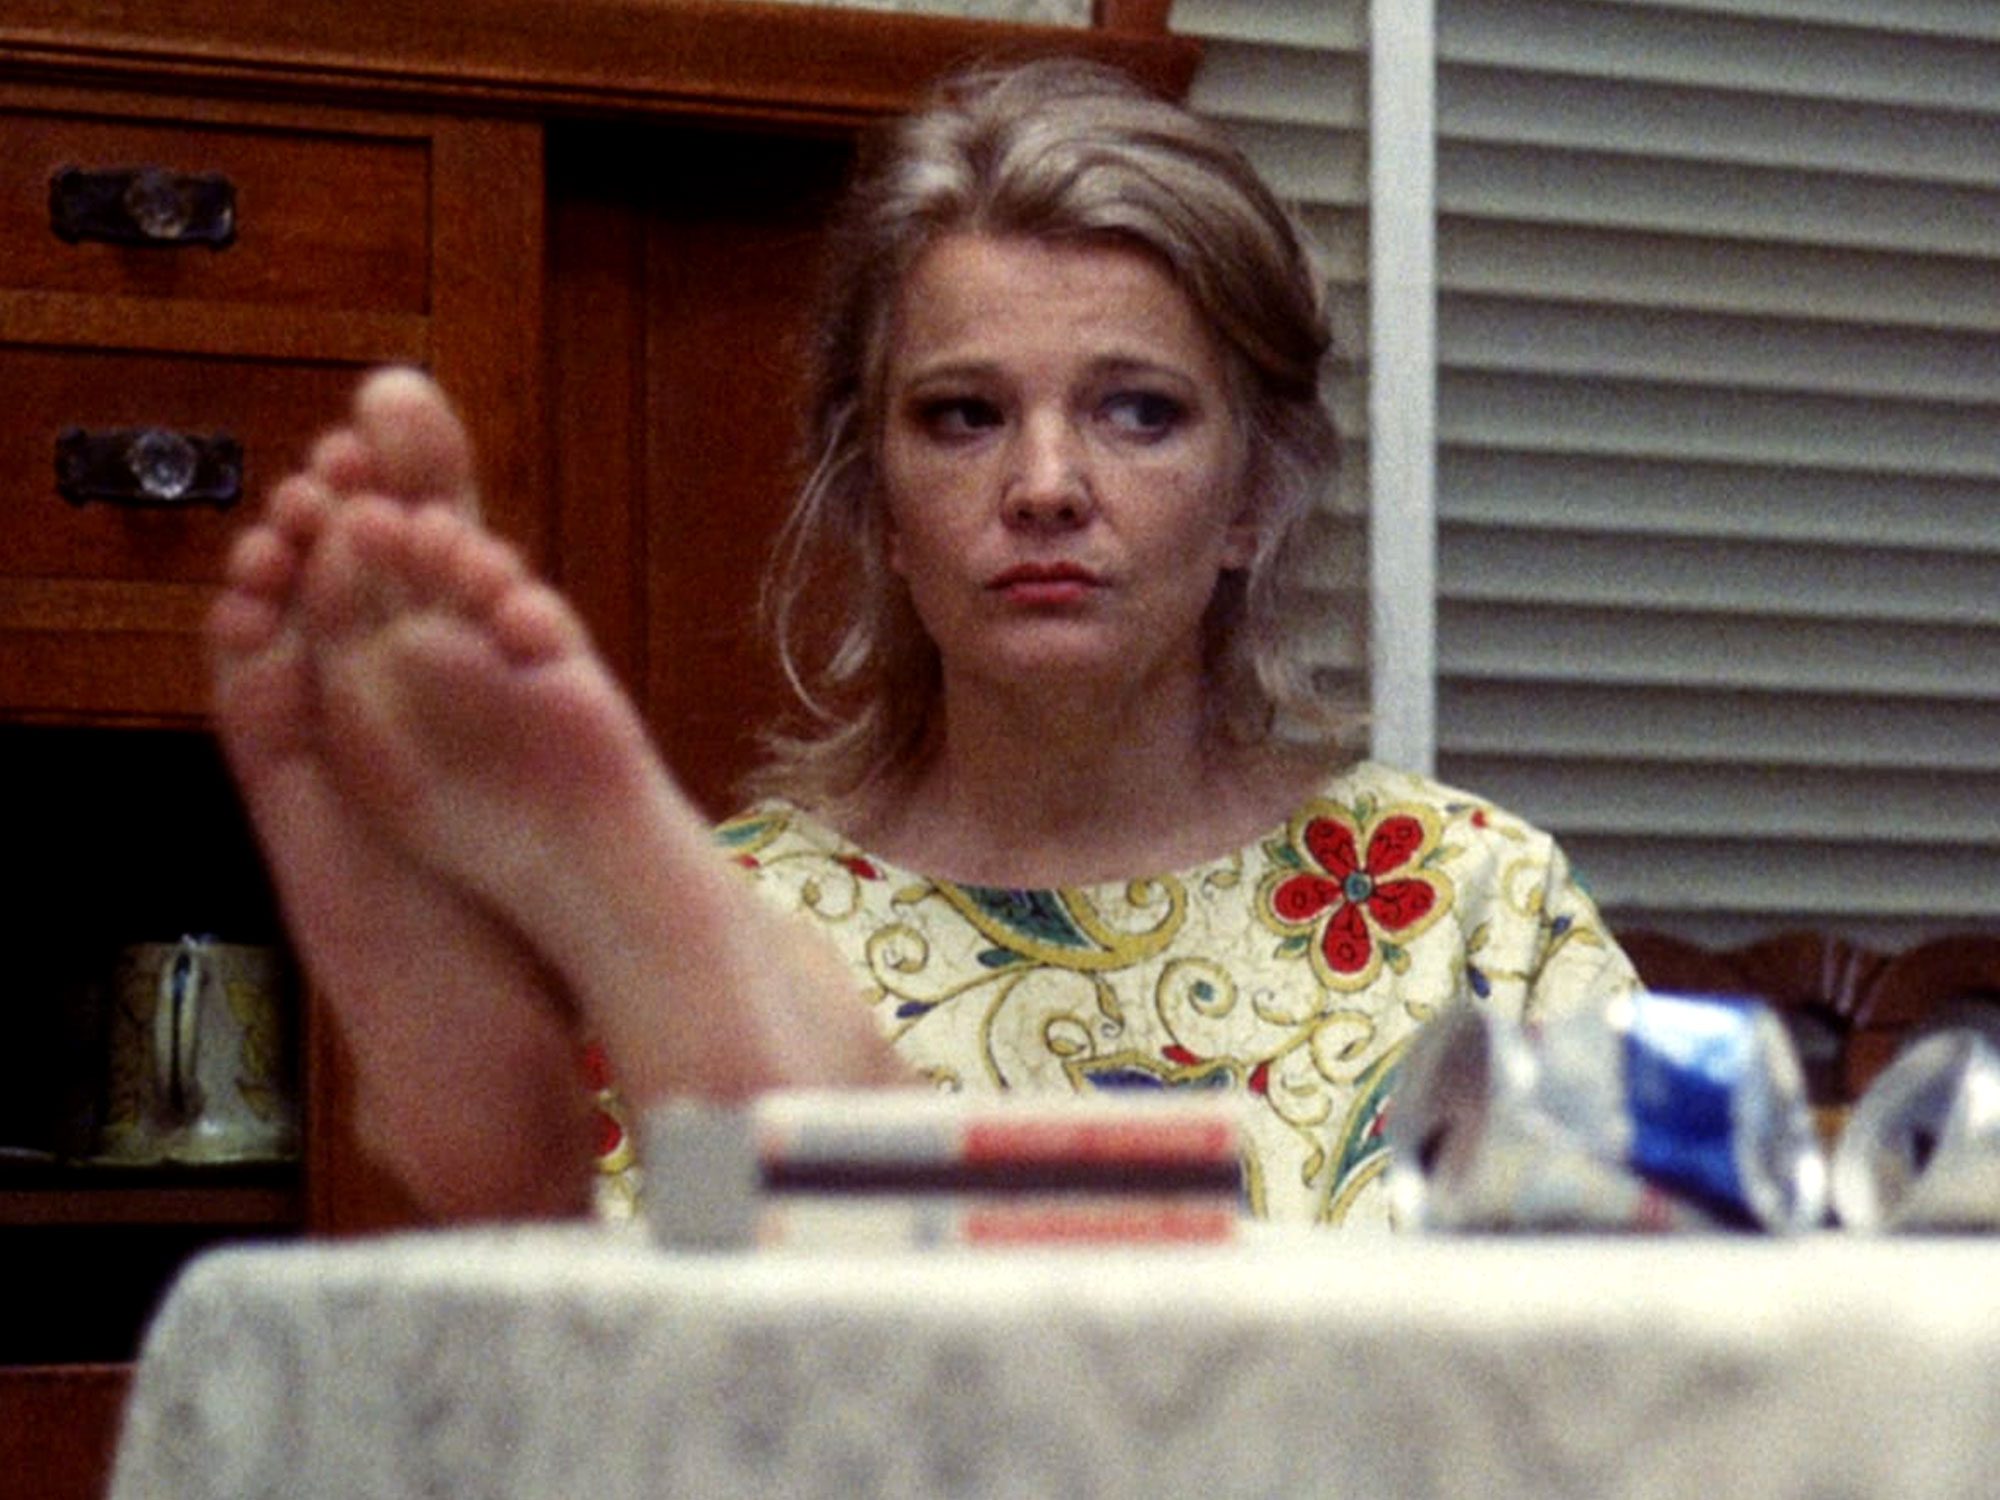 Why I Love Gena Rowlands Performance In A Woman Under The Influence